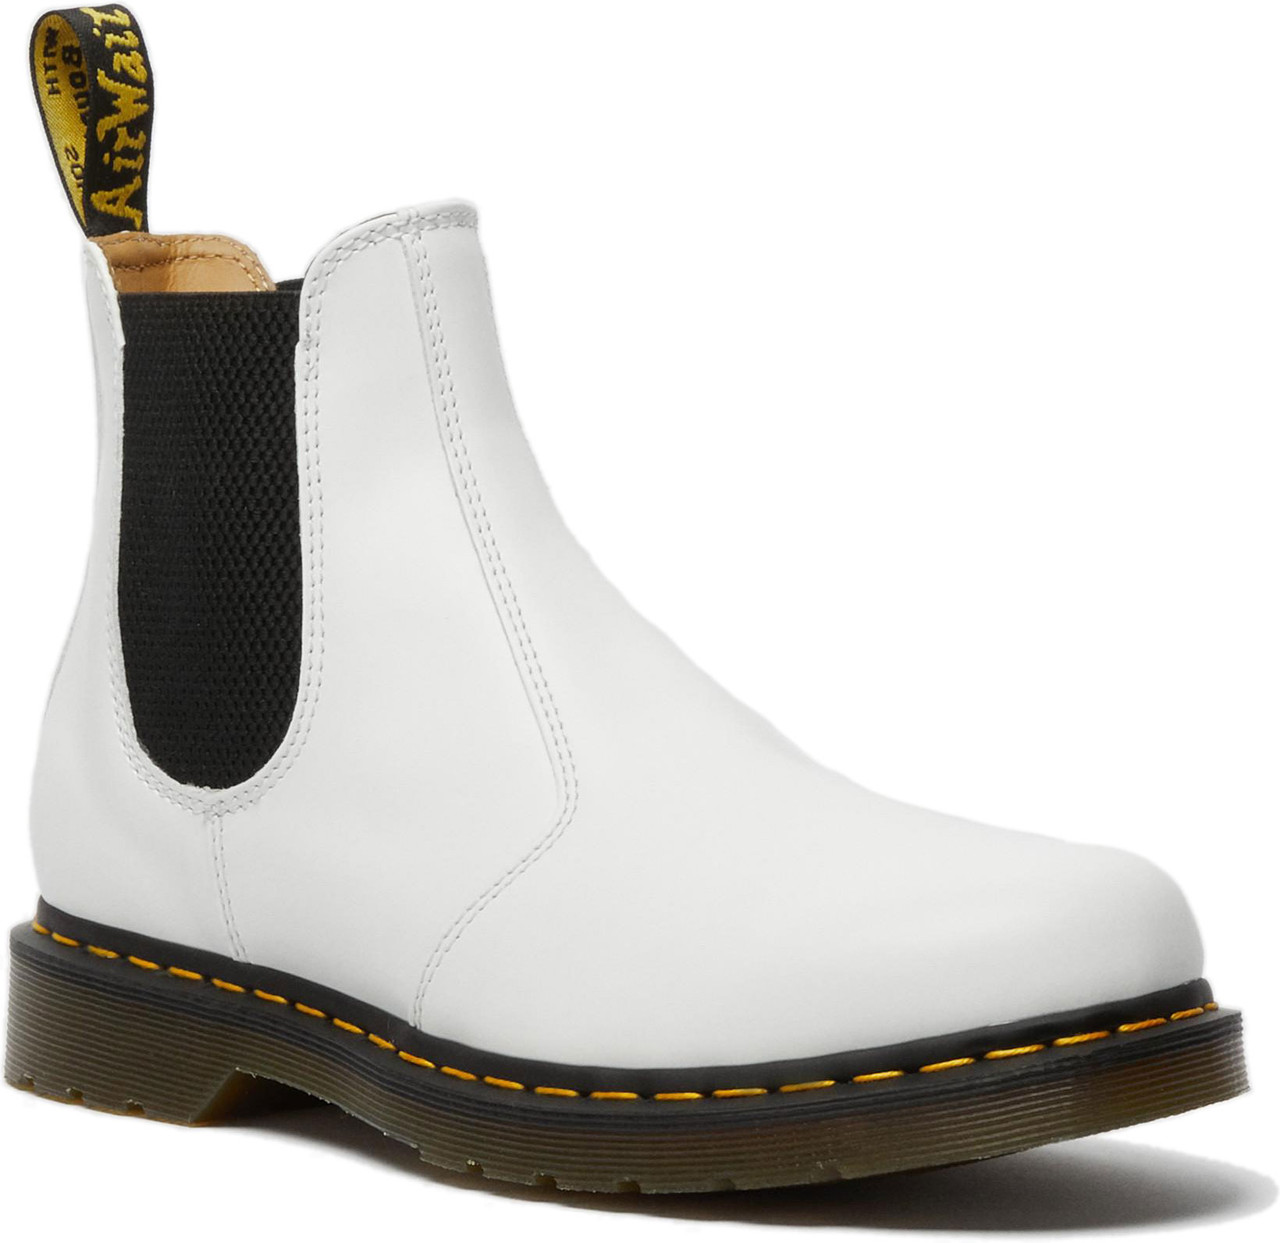 Dr. Martens Women's 2976 Stitch Smooth Leather Chelsea - FREE Shipping & FREE Returns - Women's Boots